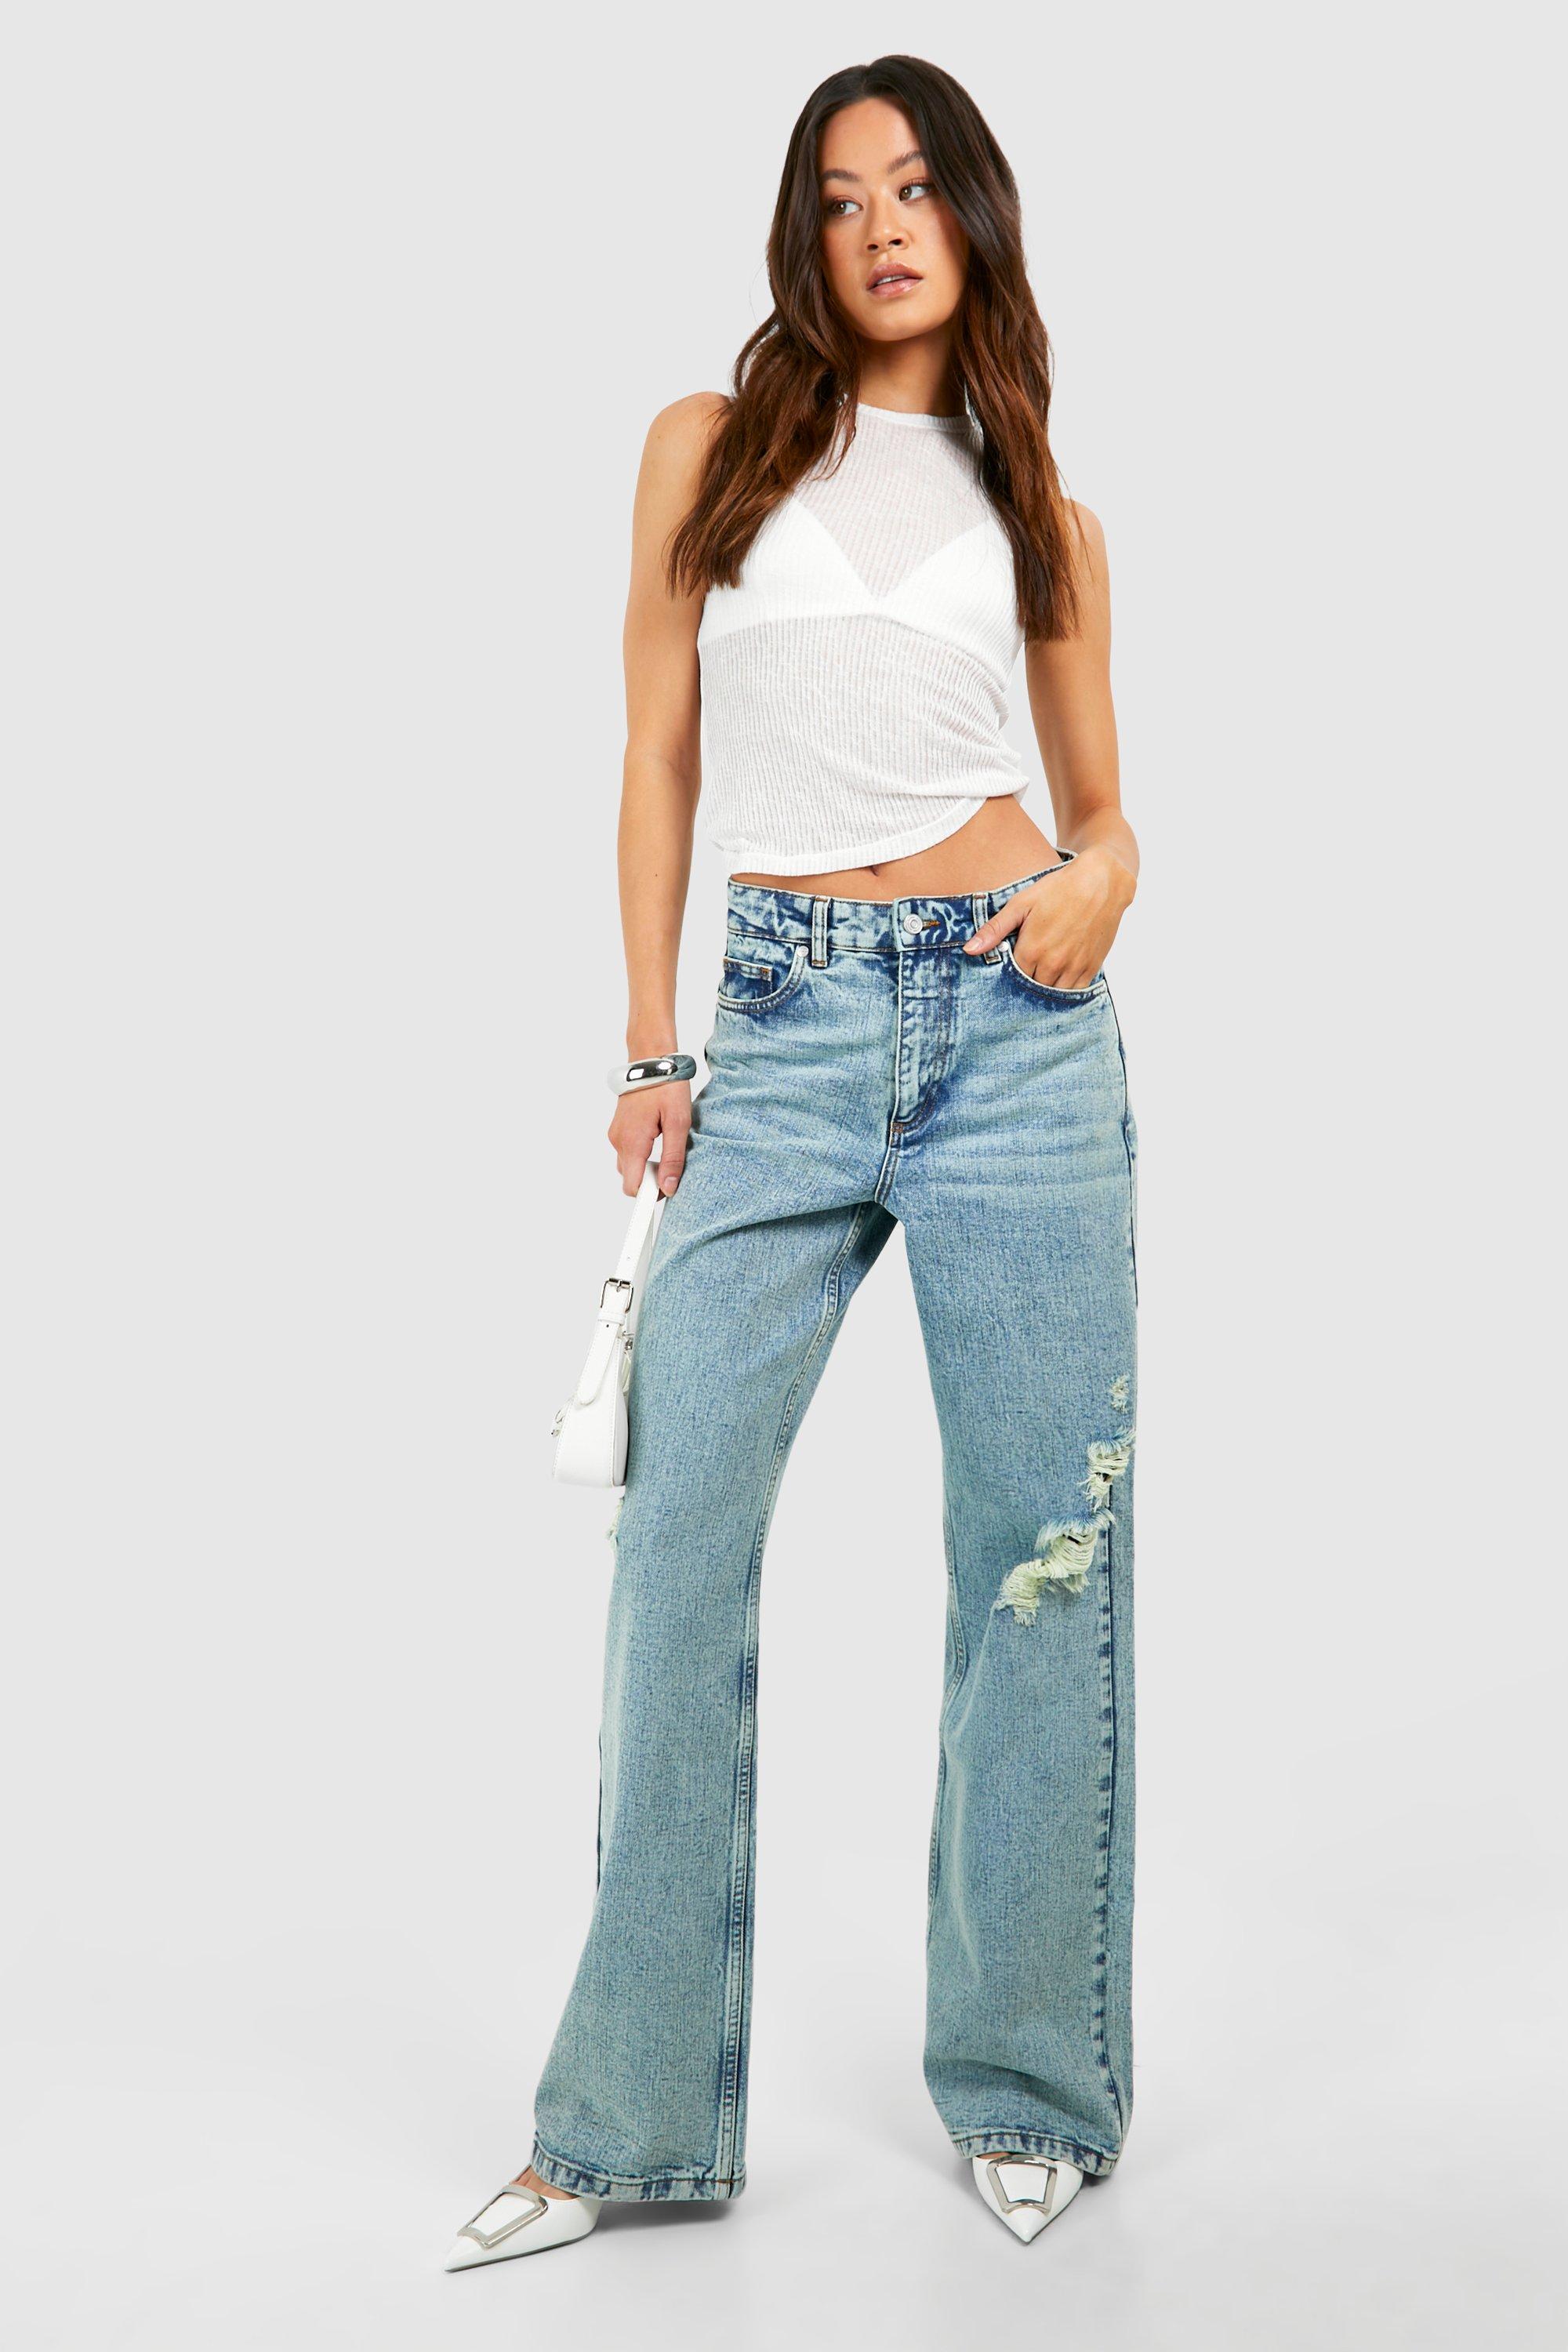 Boohoo Tall Light Blue Washed Ripped Wide Leg Jeans, Washed Blue